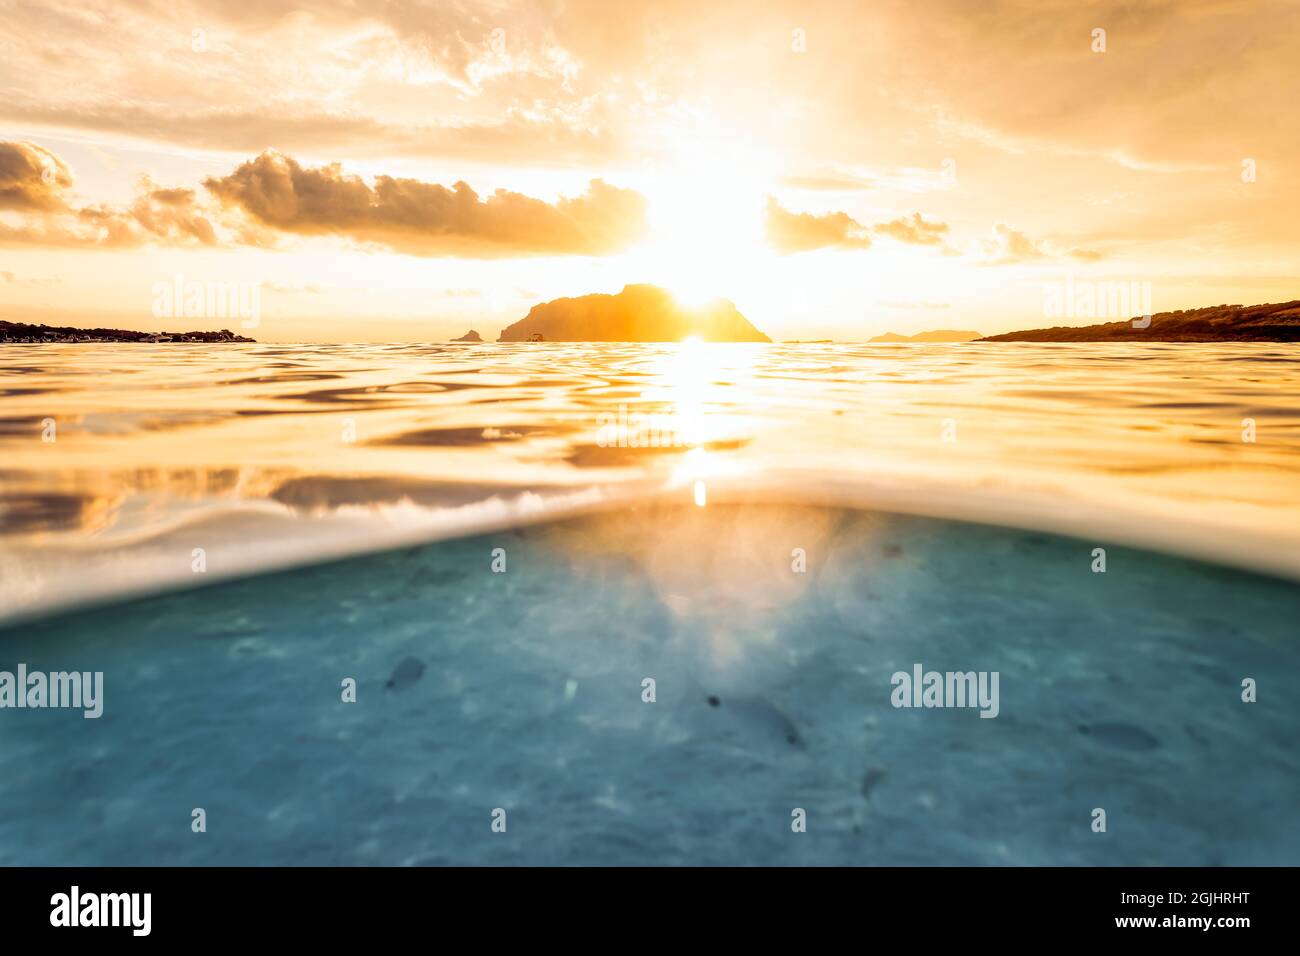 Split shot, over under water surface. Defocused fish under the waterline with Tavolara Island on the surface during a dramatic sunrise. Stock Photo